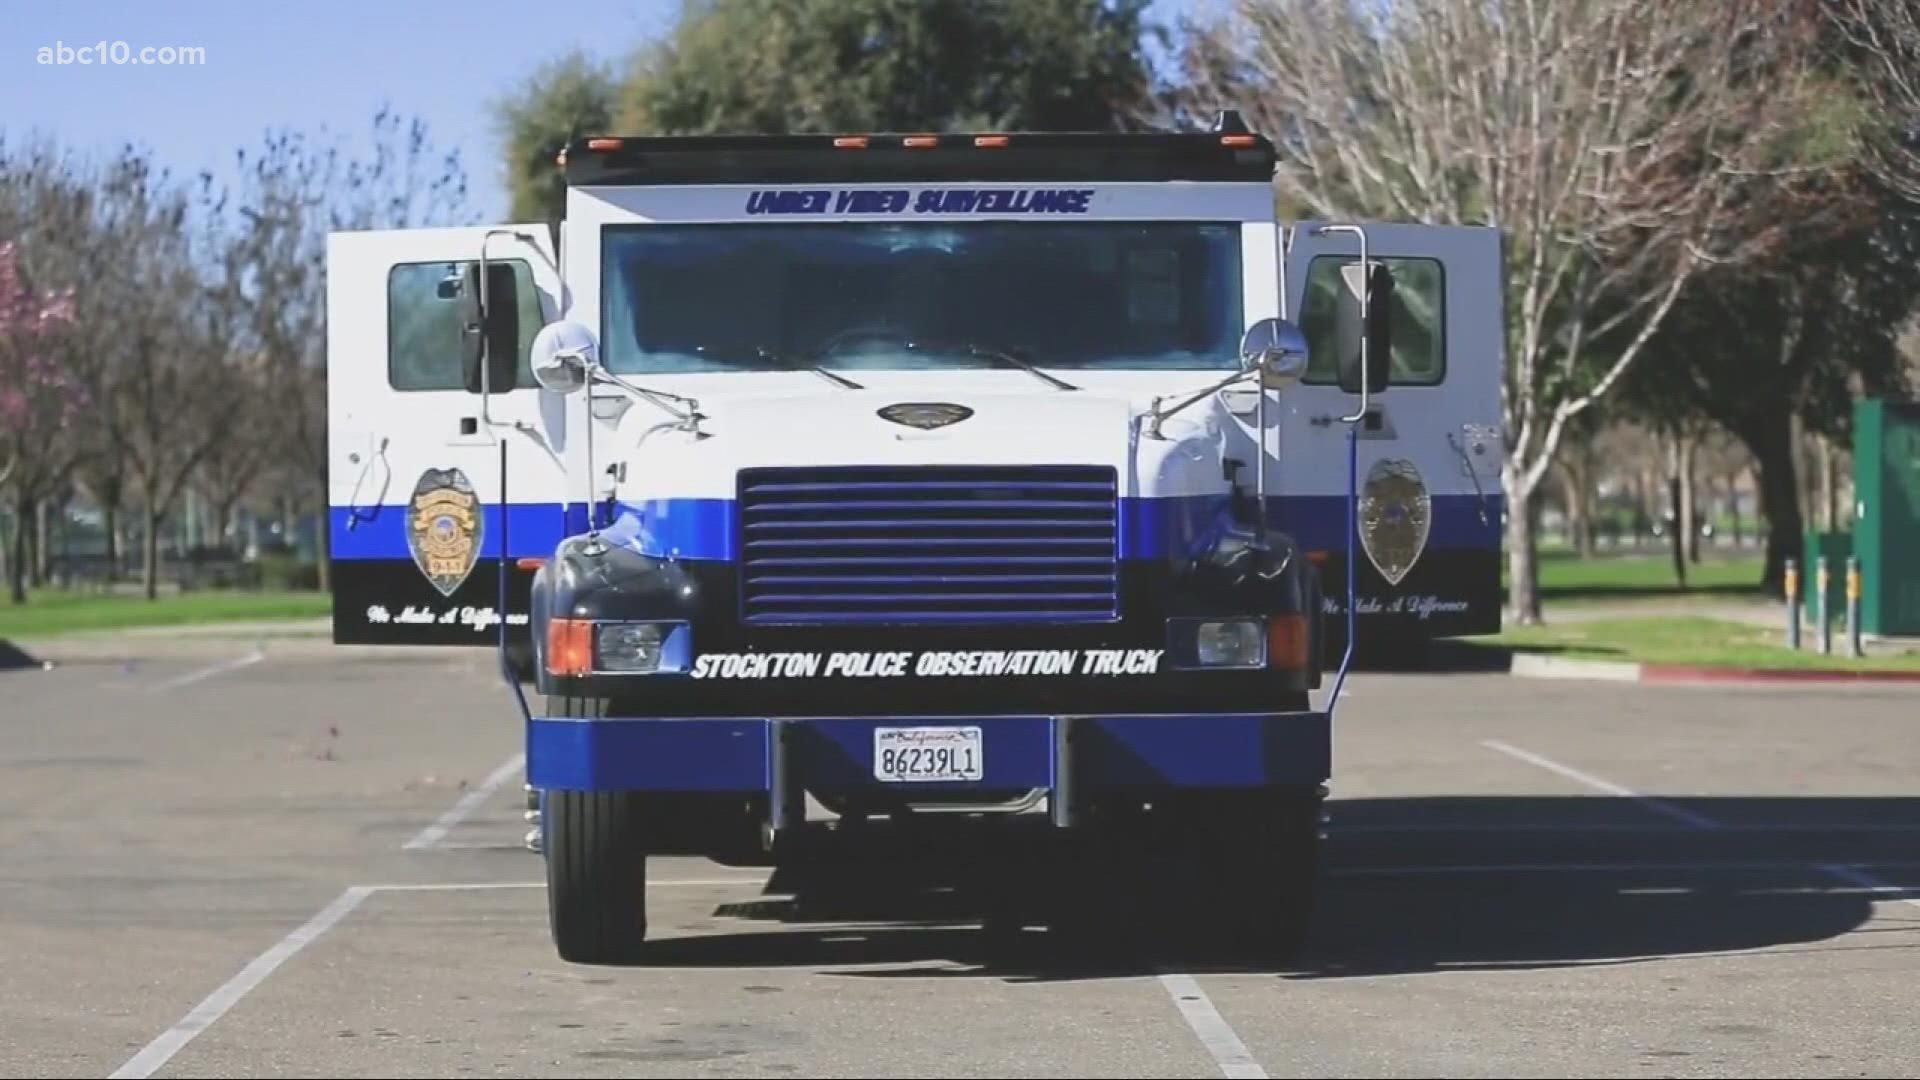 An acronym for Stockton Police Observation Truck, the 'SPOT' can detect gun shots and has a 360 degree view of any neighborhood street it passes through.